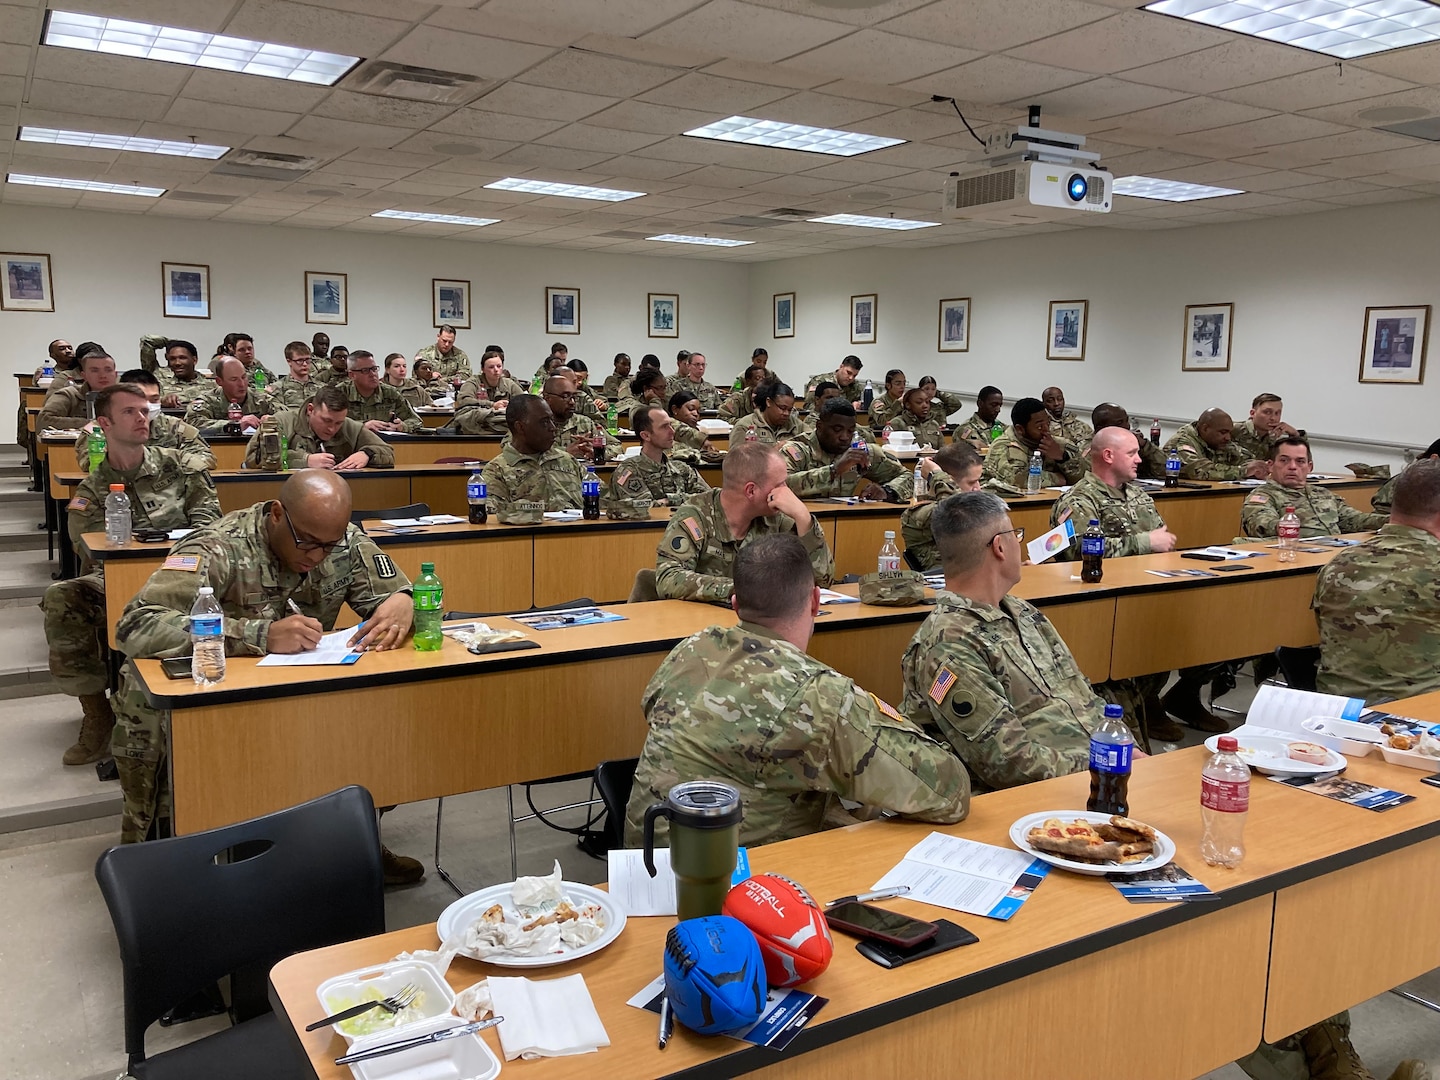 Building Strong and Ready Teams training aids 529th Soldiers prior to deployment